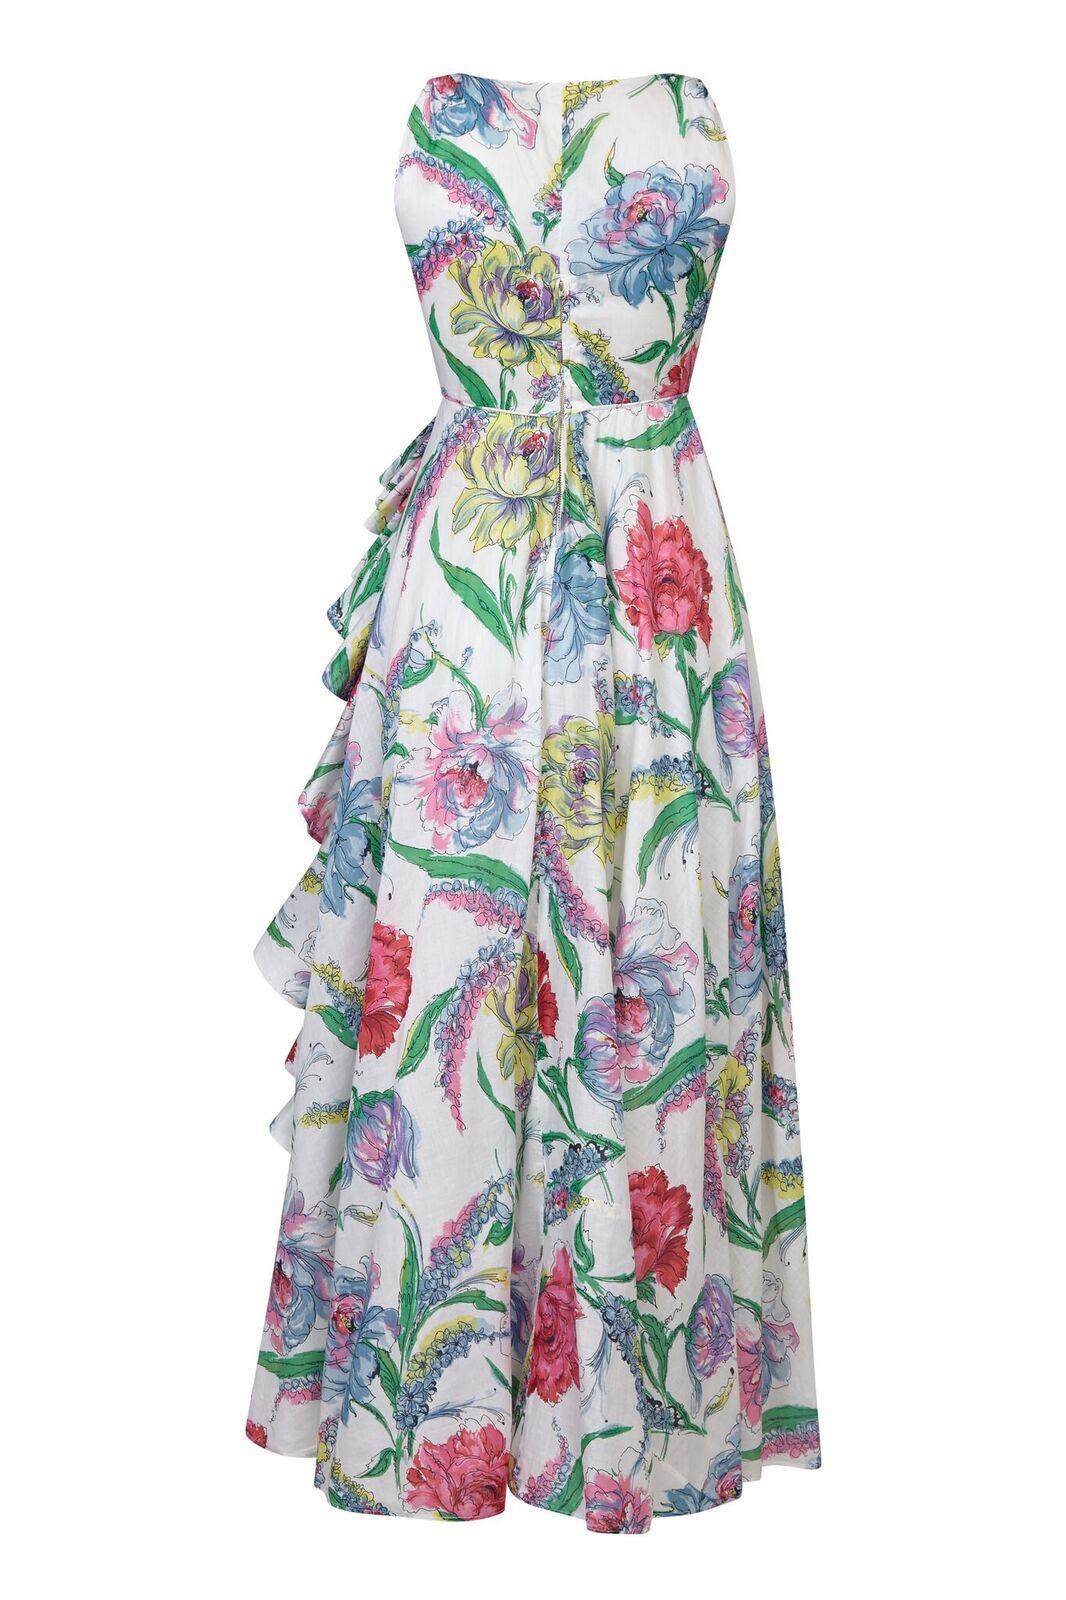 This sensational 1950s white cotton organza gown with floral print overlay is of exceptional quality and is beautifully constructed to showcase a classic hourglass figure. The floral overlay hosts a vibrant abstracted floral print in deep pinks,